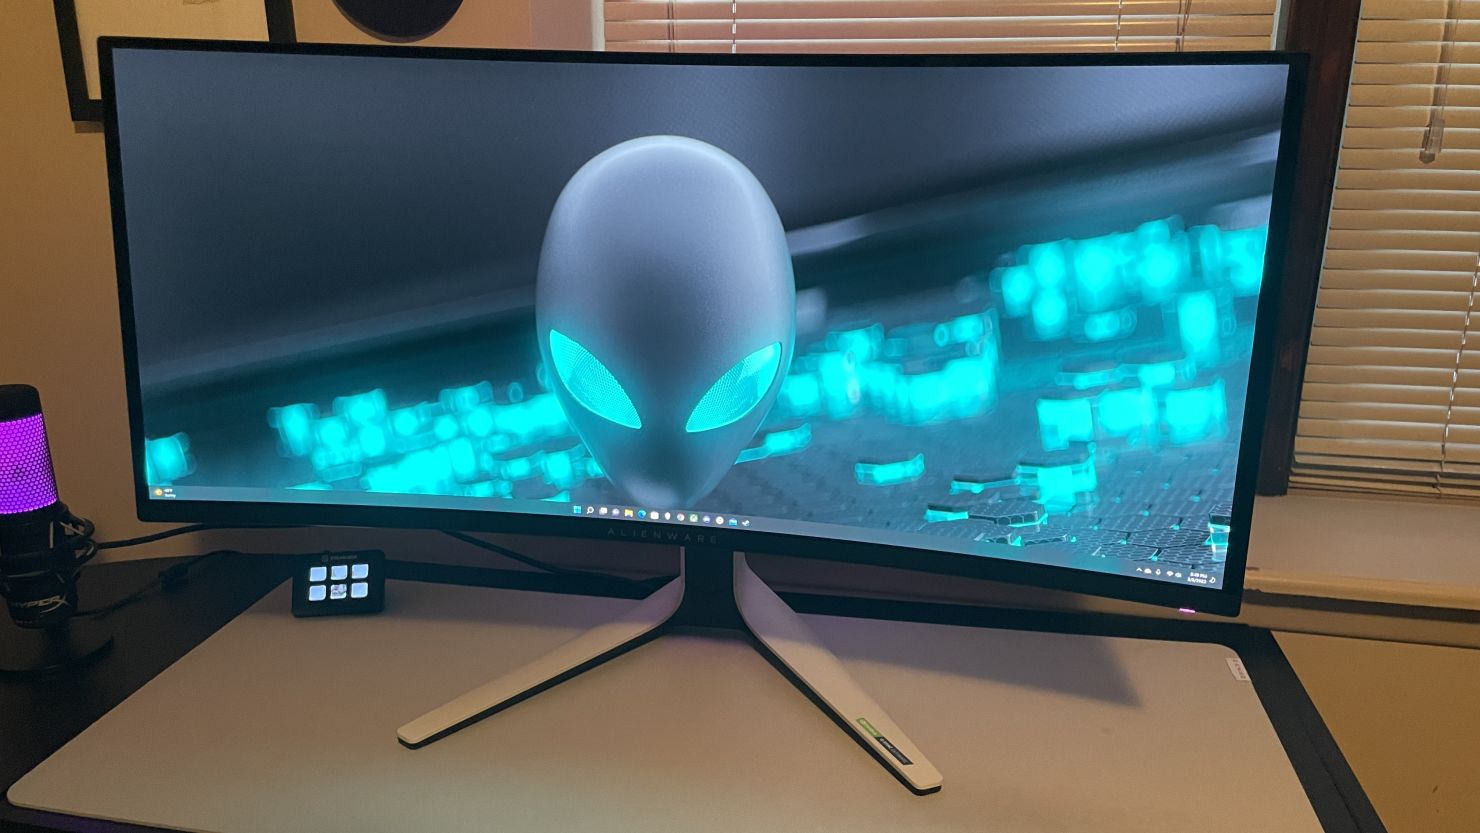 Alienware has new gaming monitors with a built-in headset stand